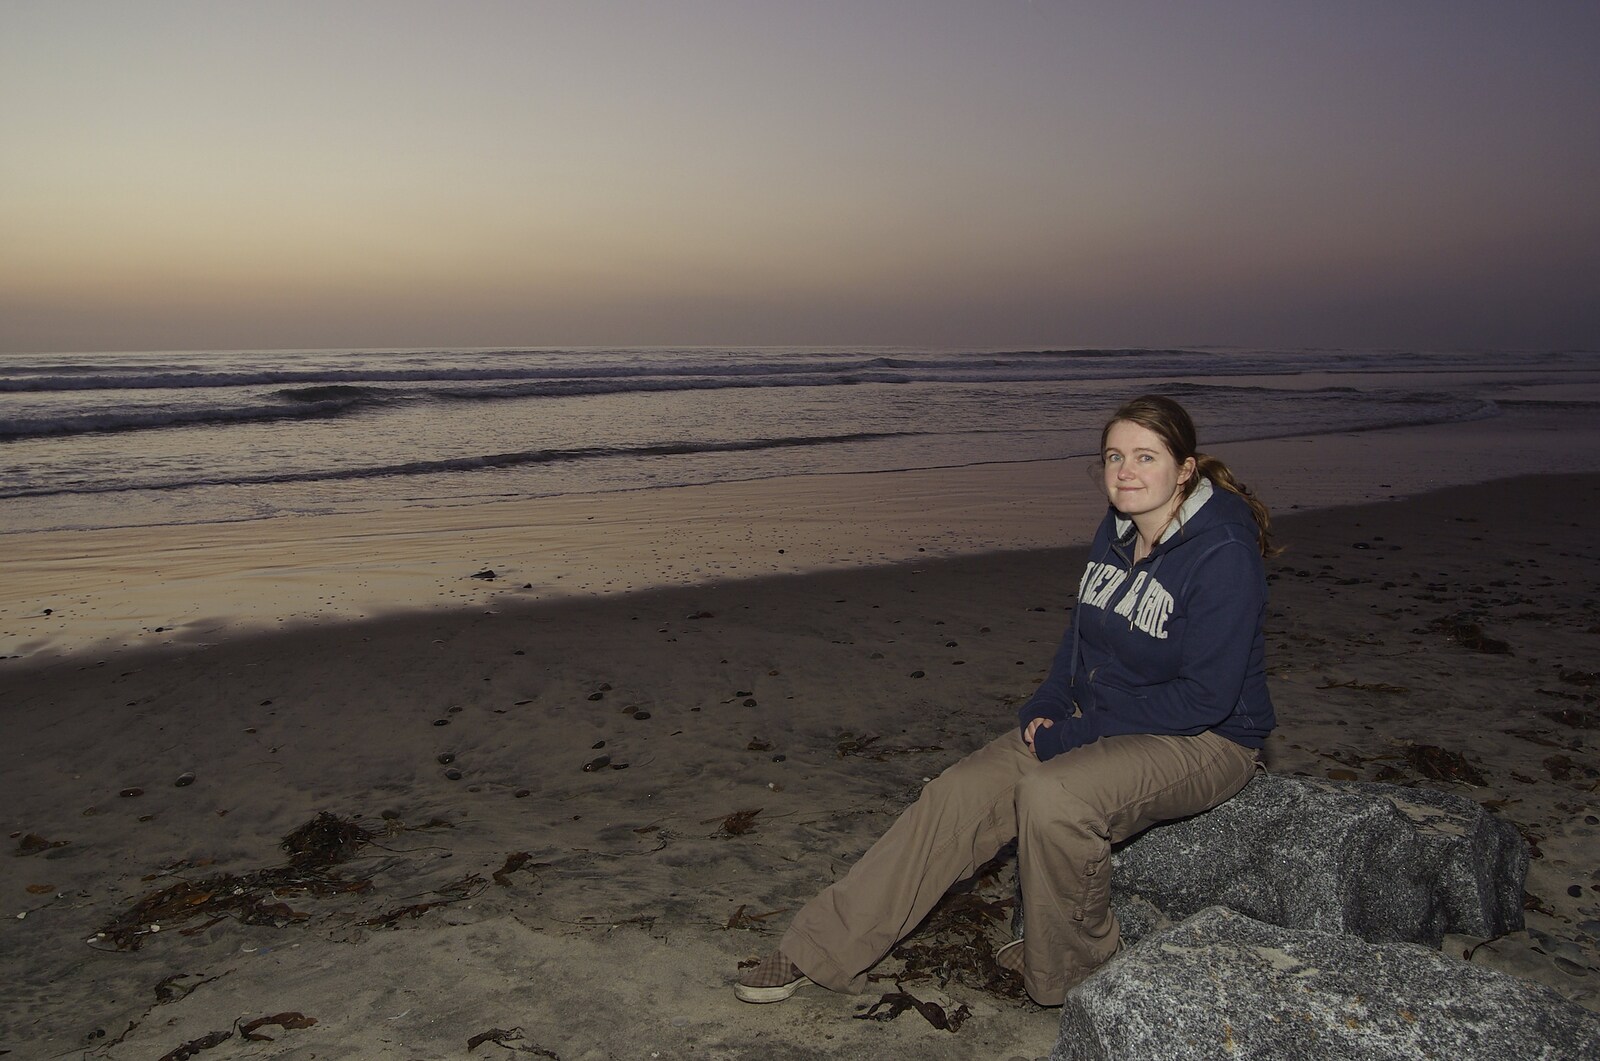 Isobel in the dusk from San Diego 8: The Beaches of Torrey Pines, and Ramona, California, USA - 29th February 2008